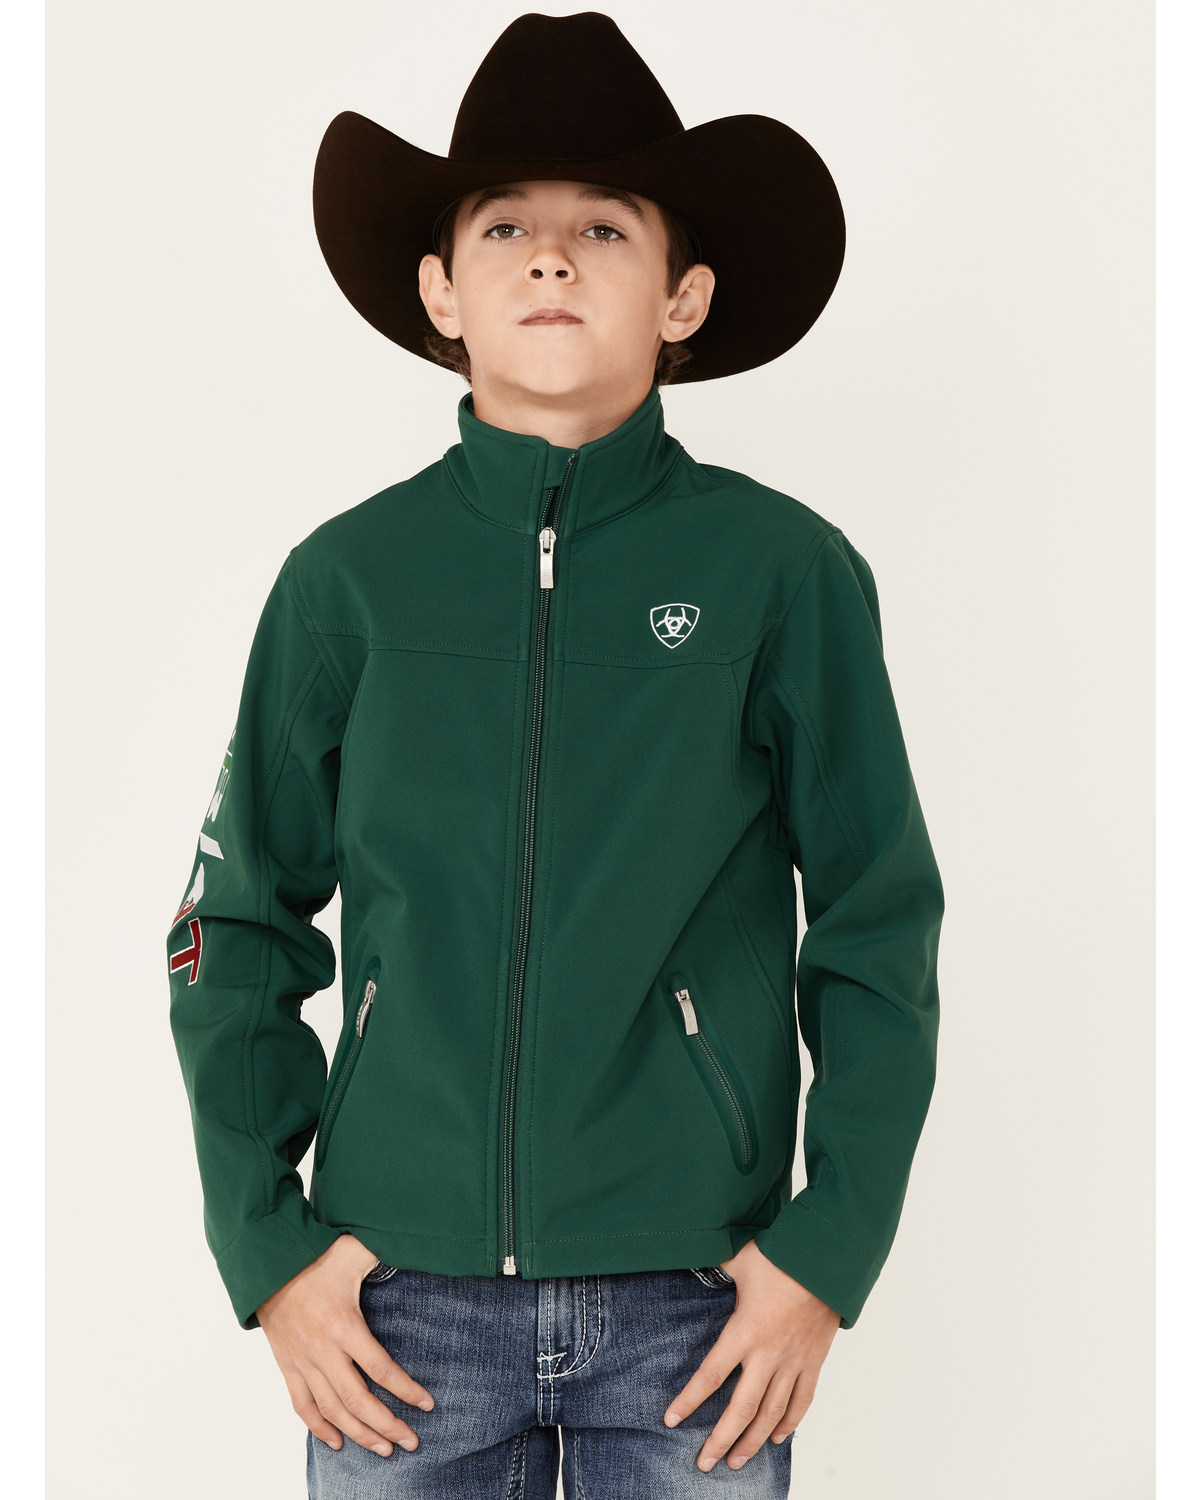 Ariat Boys' Team Mexico Patch Flag Zip-Front Softshell Jacket